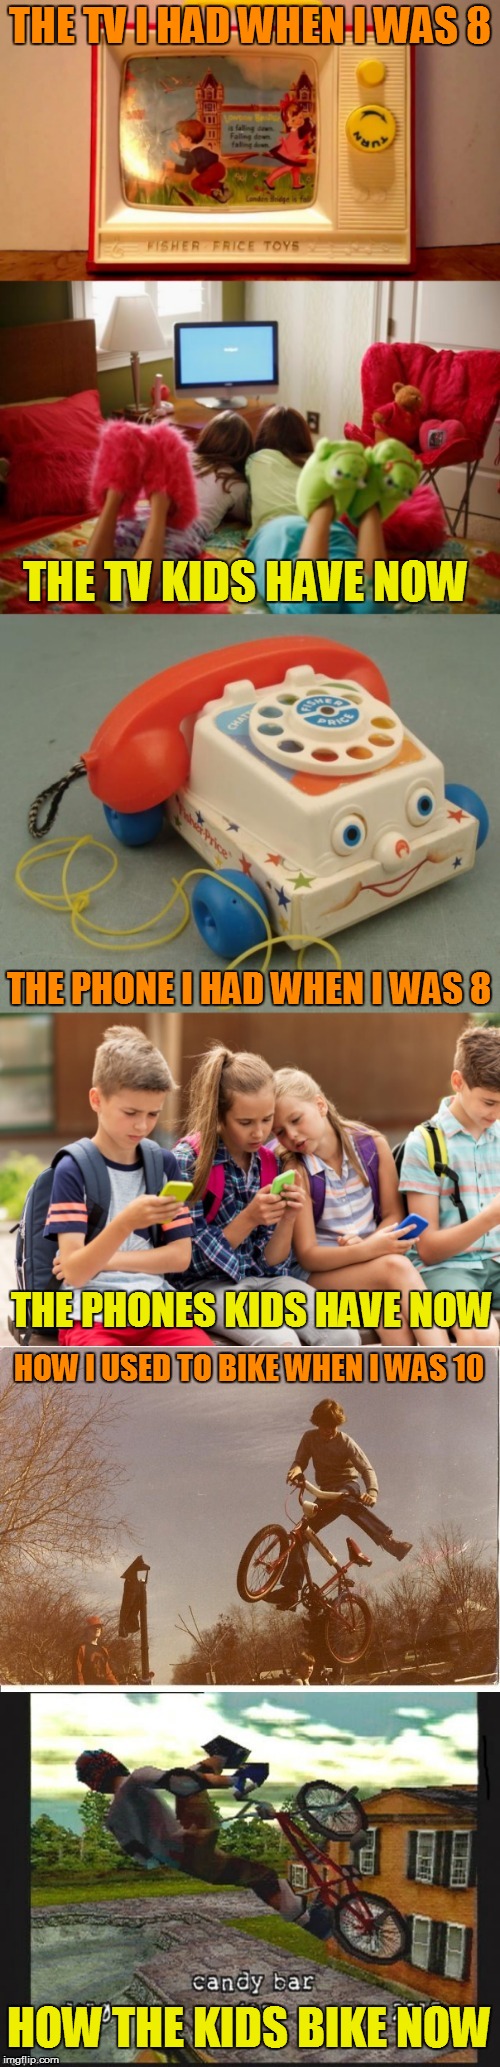 Raydog inspired back in my day meme! | THE TV I HAD WHEN I WAS 8; THE TV KIDS HAVE NOW; THE PHONE I HAD WHEN I WAS 8; THE PHONES KIDS HAVE NOW; HOW I USED TO BIKE WHEN I WAS 10; HOW THE KIDS BIKE NOW | image tagged in memes,back in my day,70's kids,raydog,today's kids,inspired | made w/ Imgflip meme maker